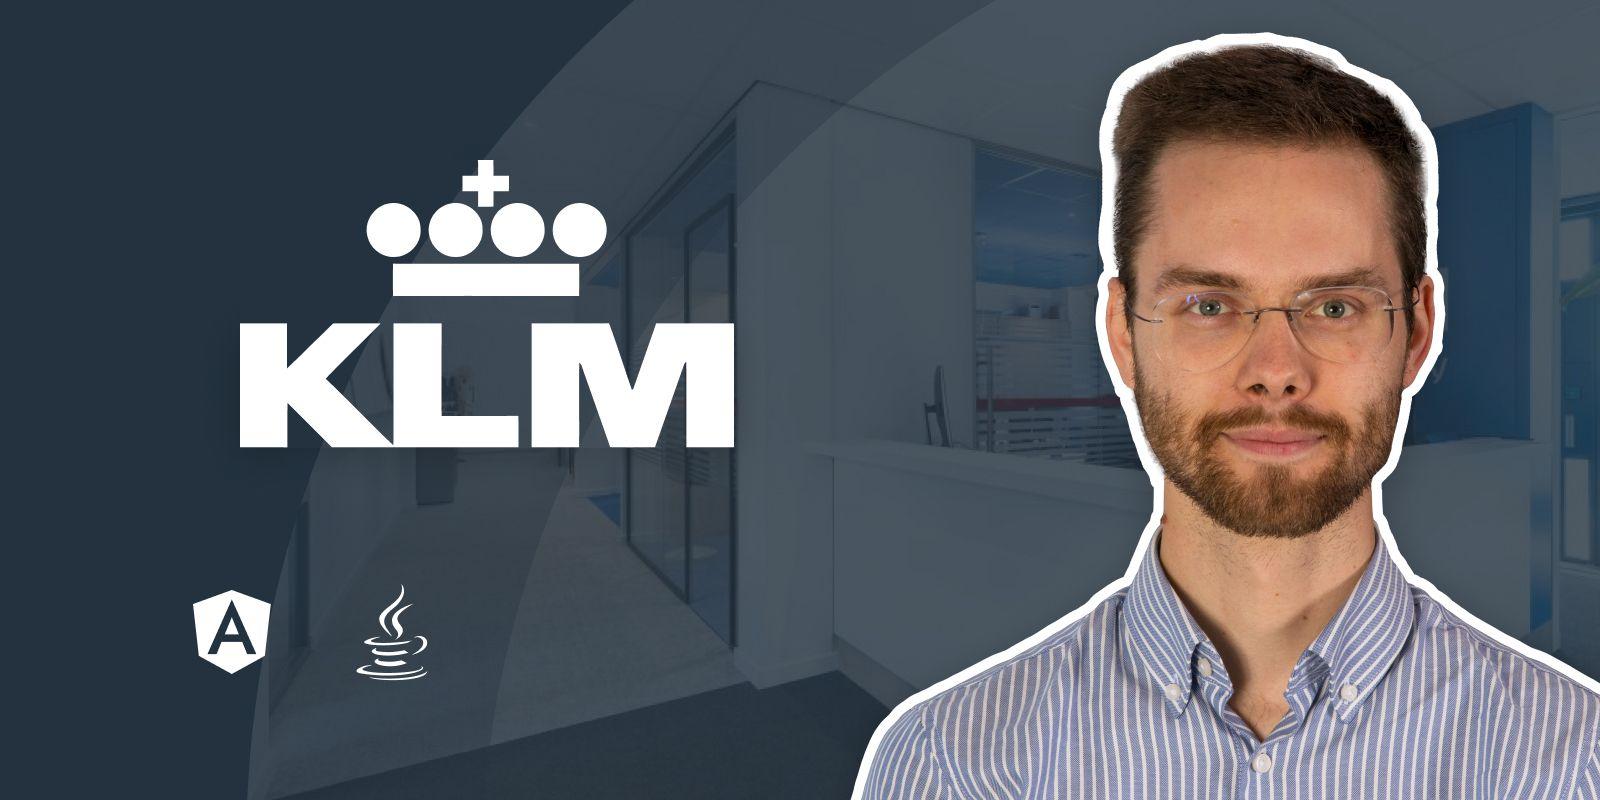 Case study: Andrey at KLM